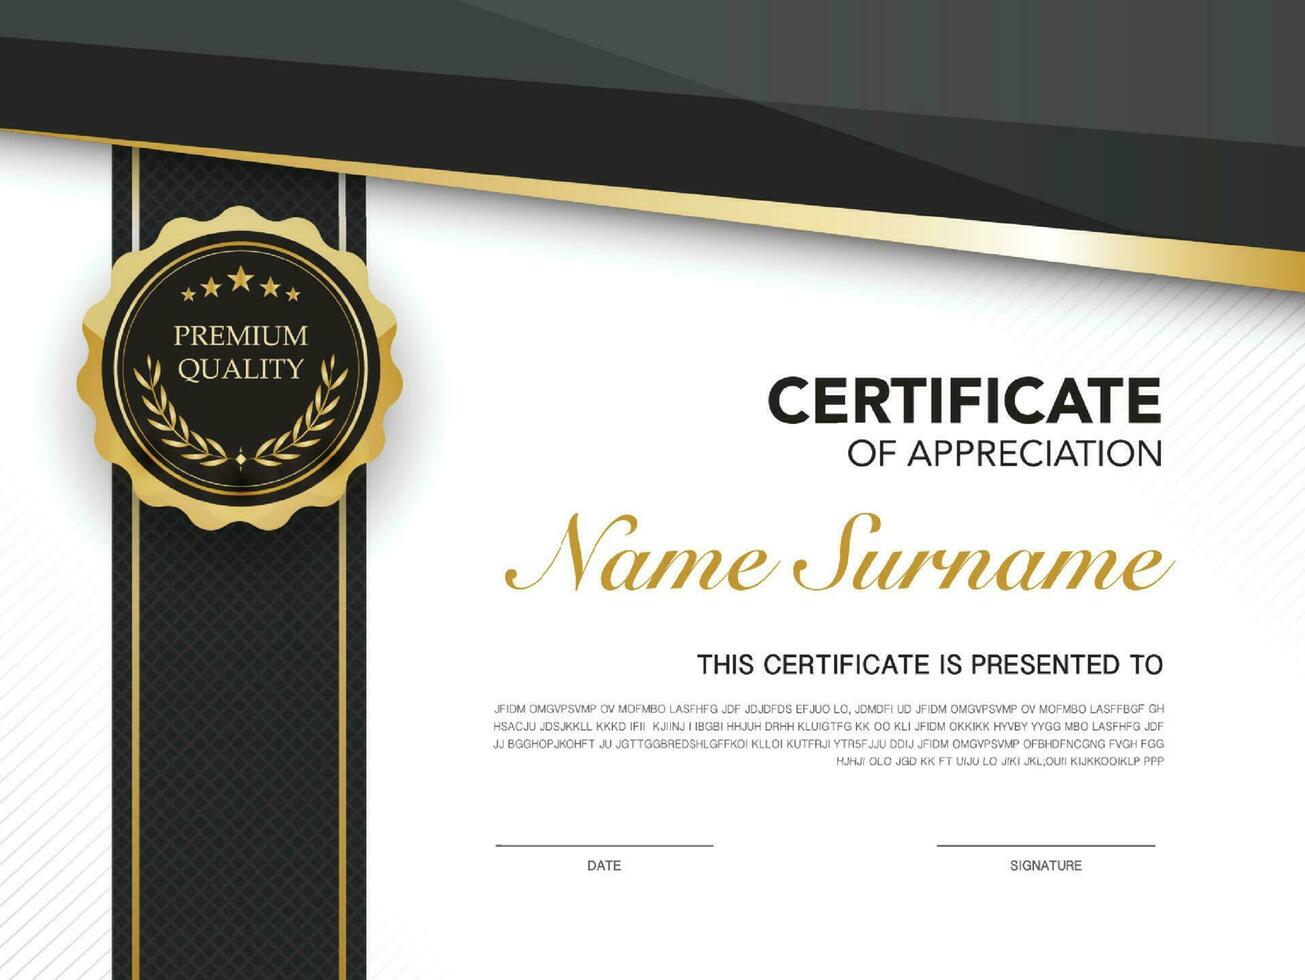 Diploma certificate template black and gold color with luxury and modern style vector image Premium Vector.